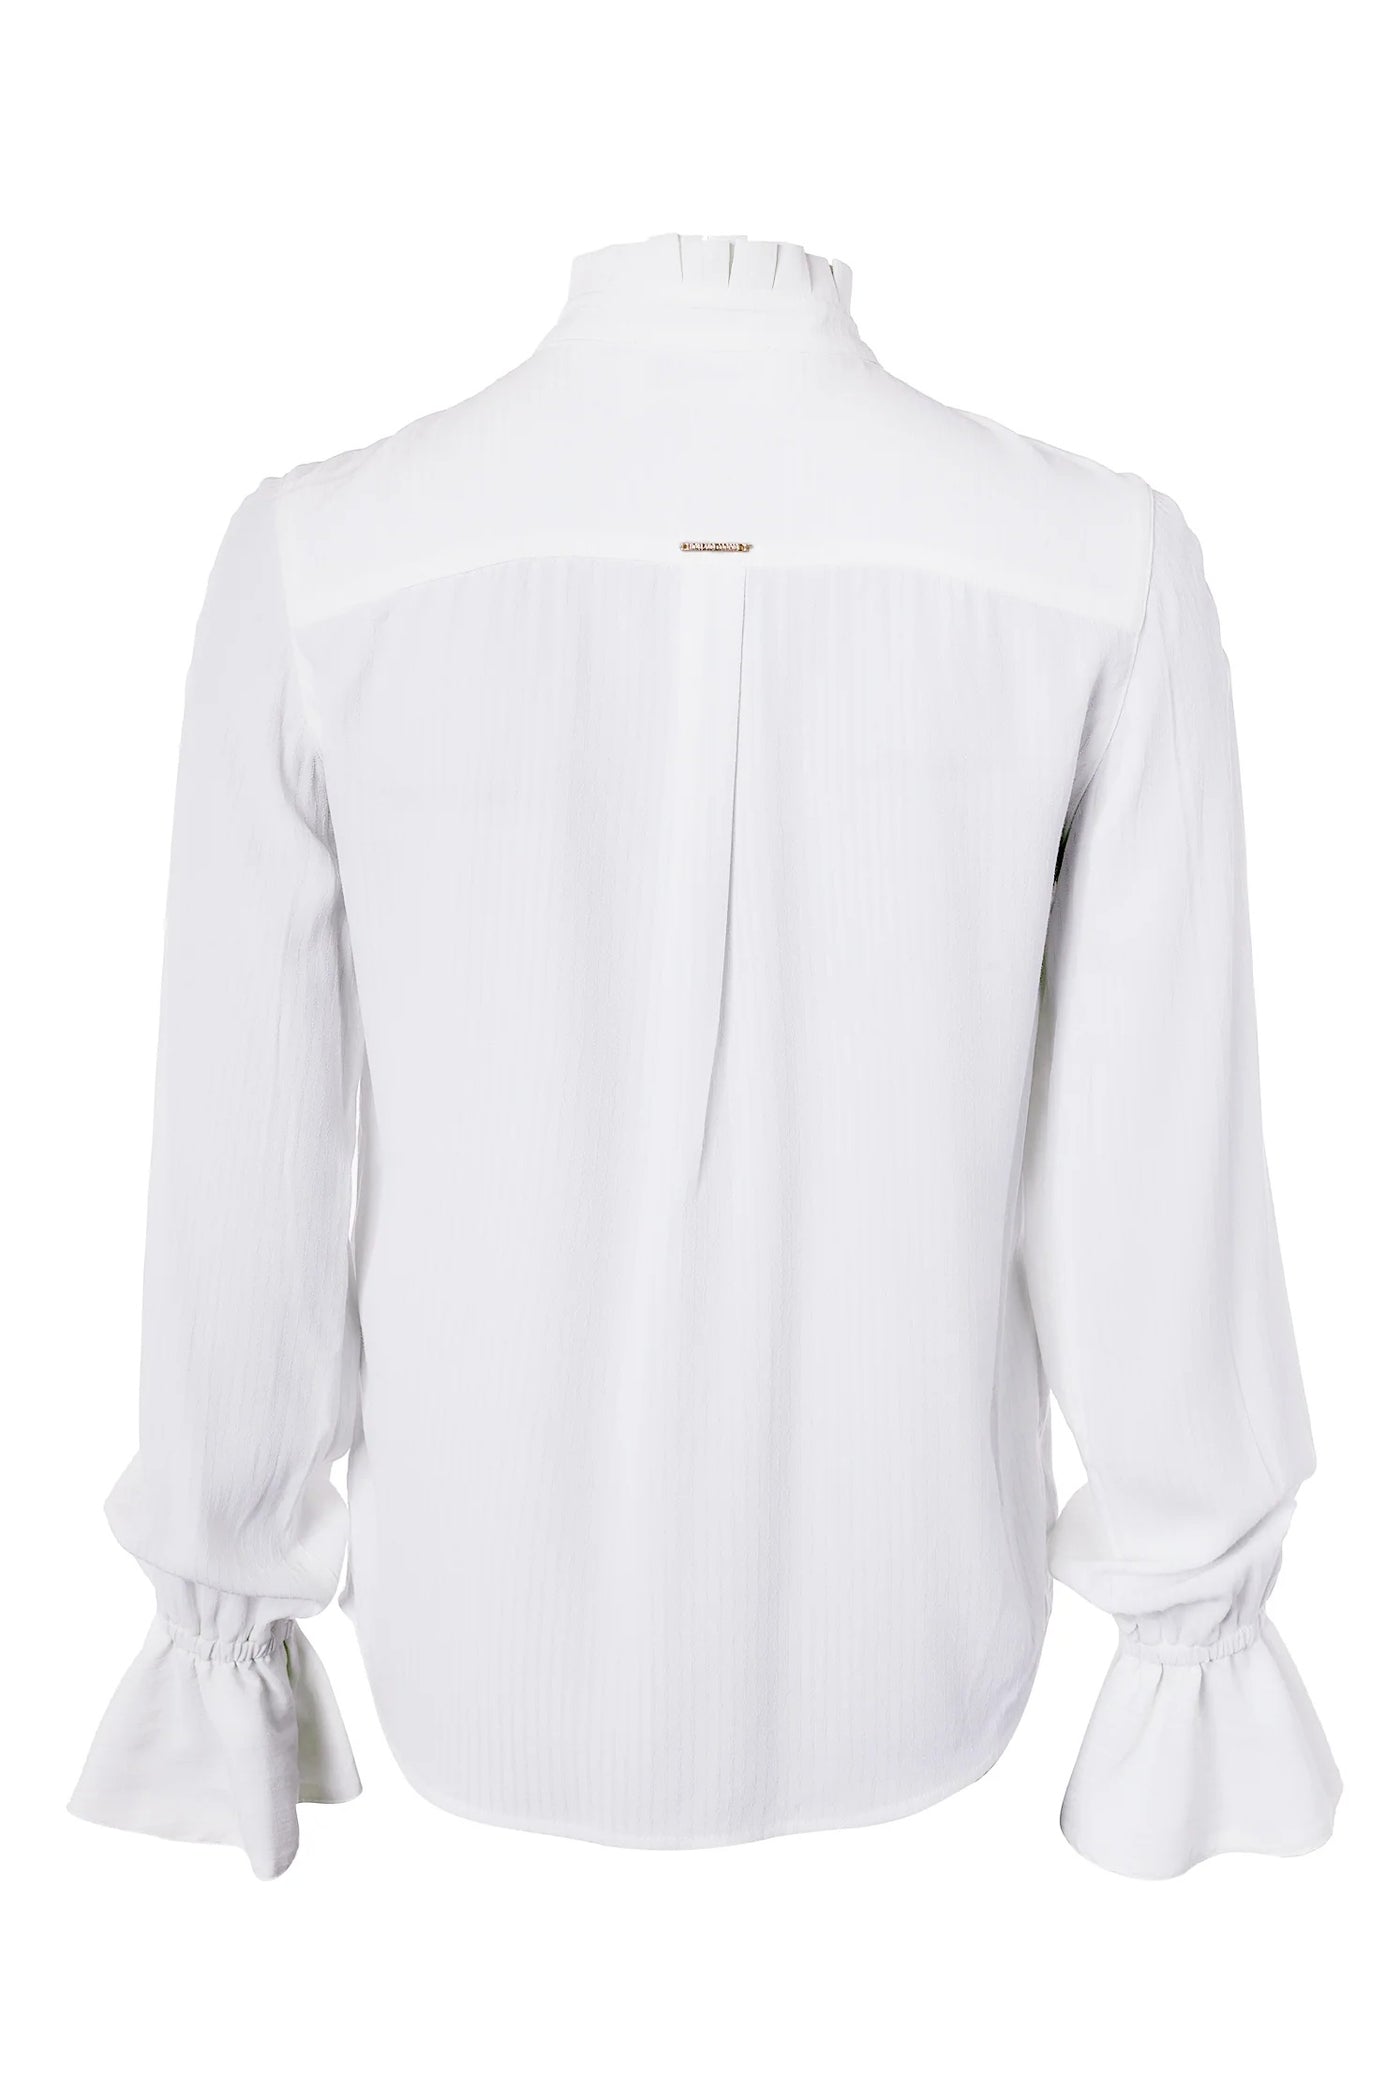 Holland Cooper Lilibet Shirt in White Back